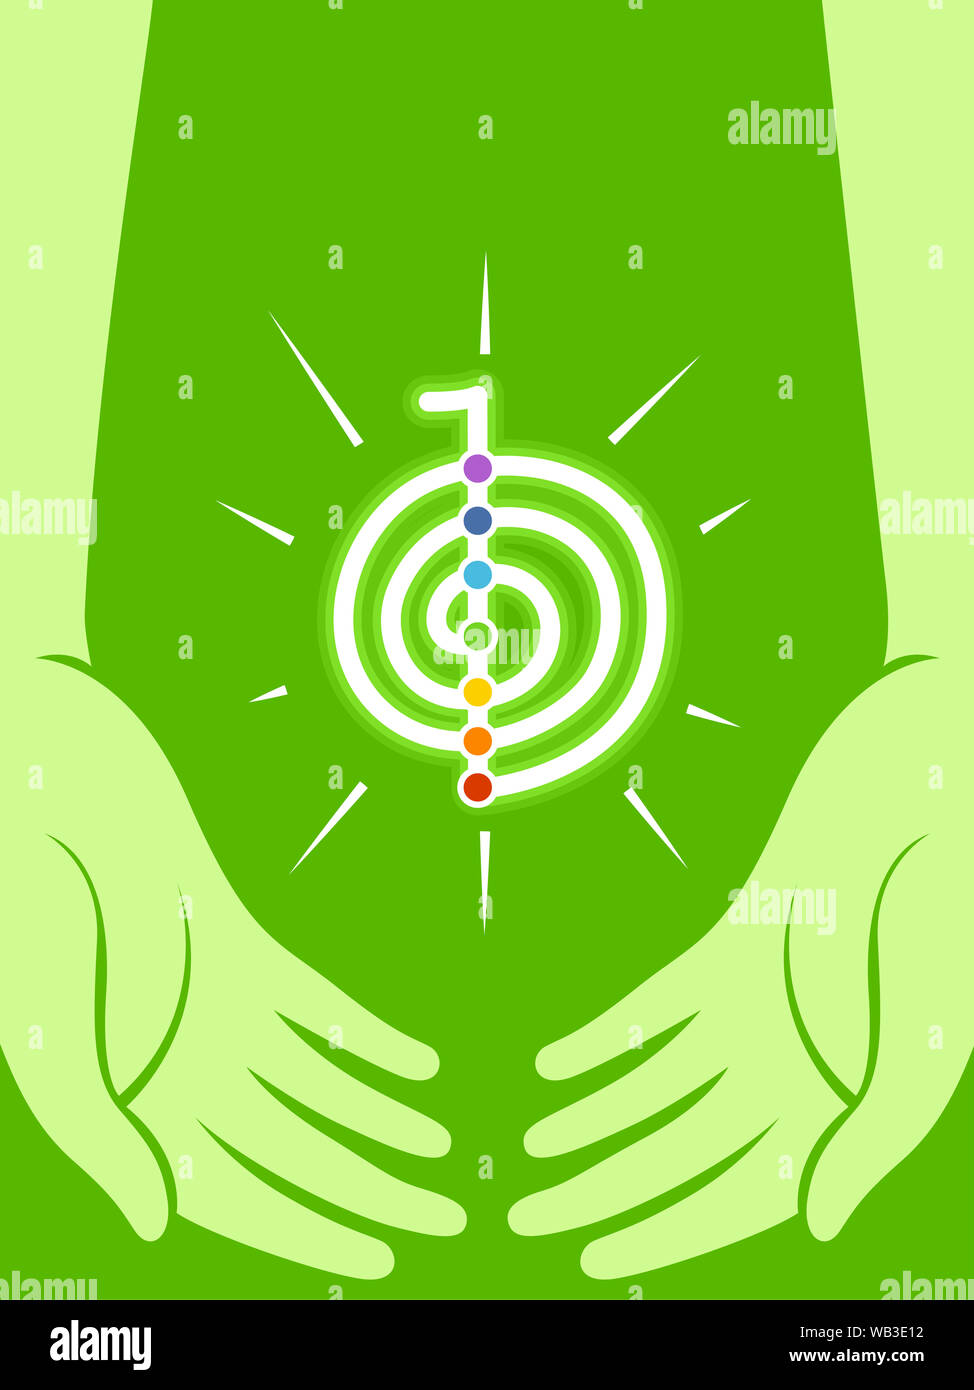 Illustration of Hands with Reiki Symbol and Seven Chakra Energy Dots Stock Photo